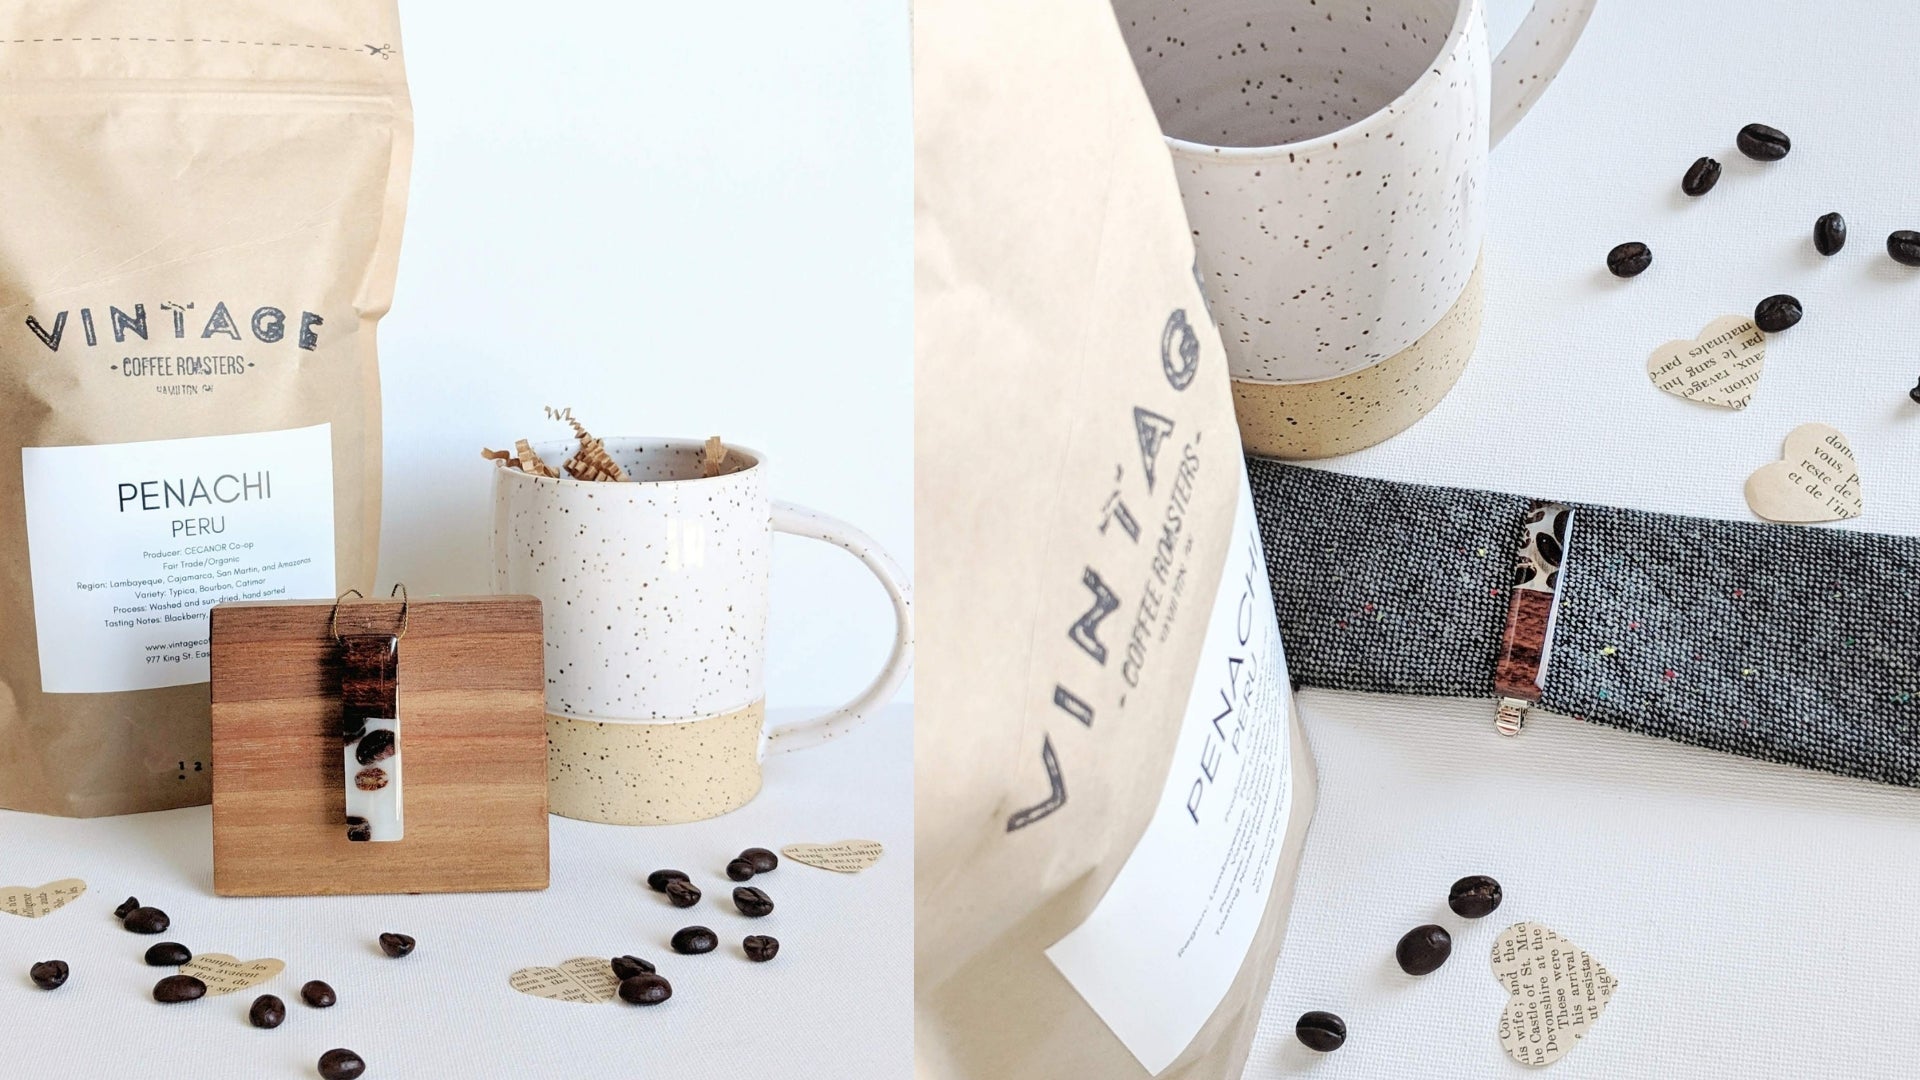 COFFEE//LOVERS Gift Set - perfect for Valentine's Day!